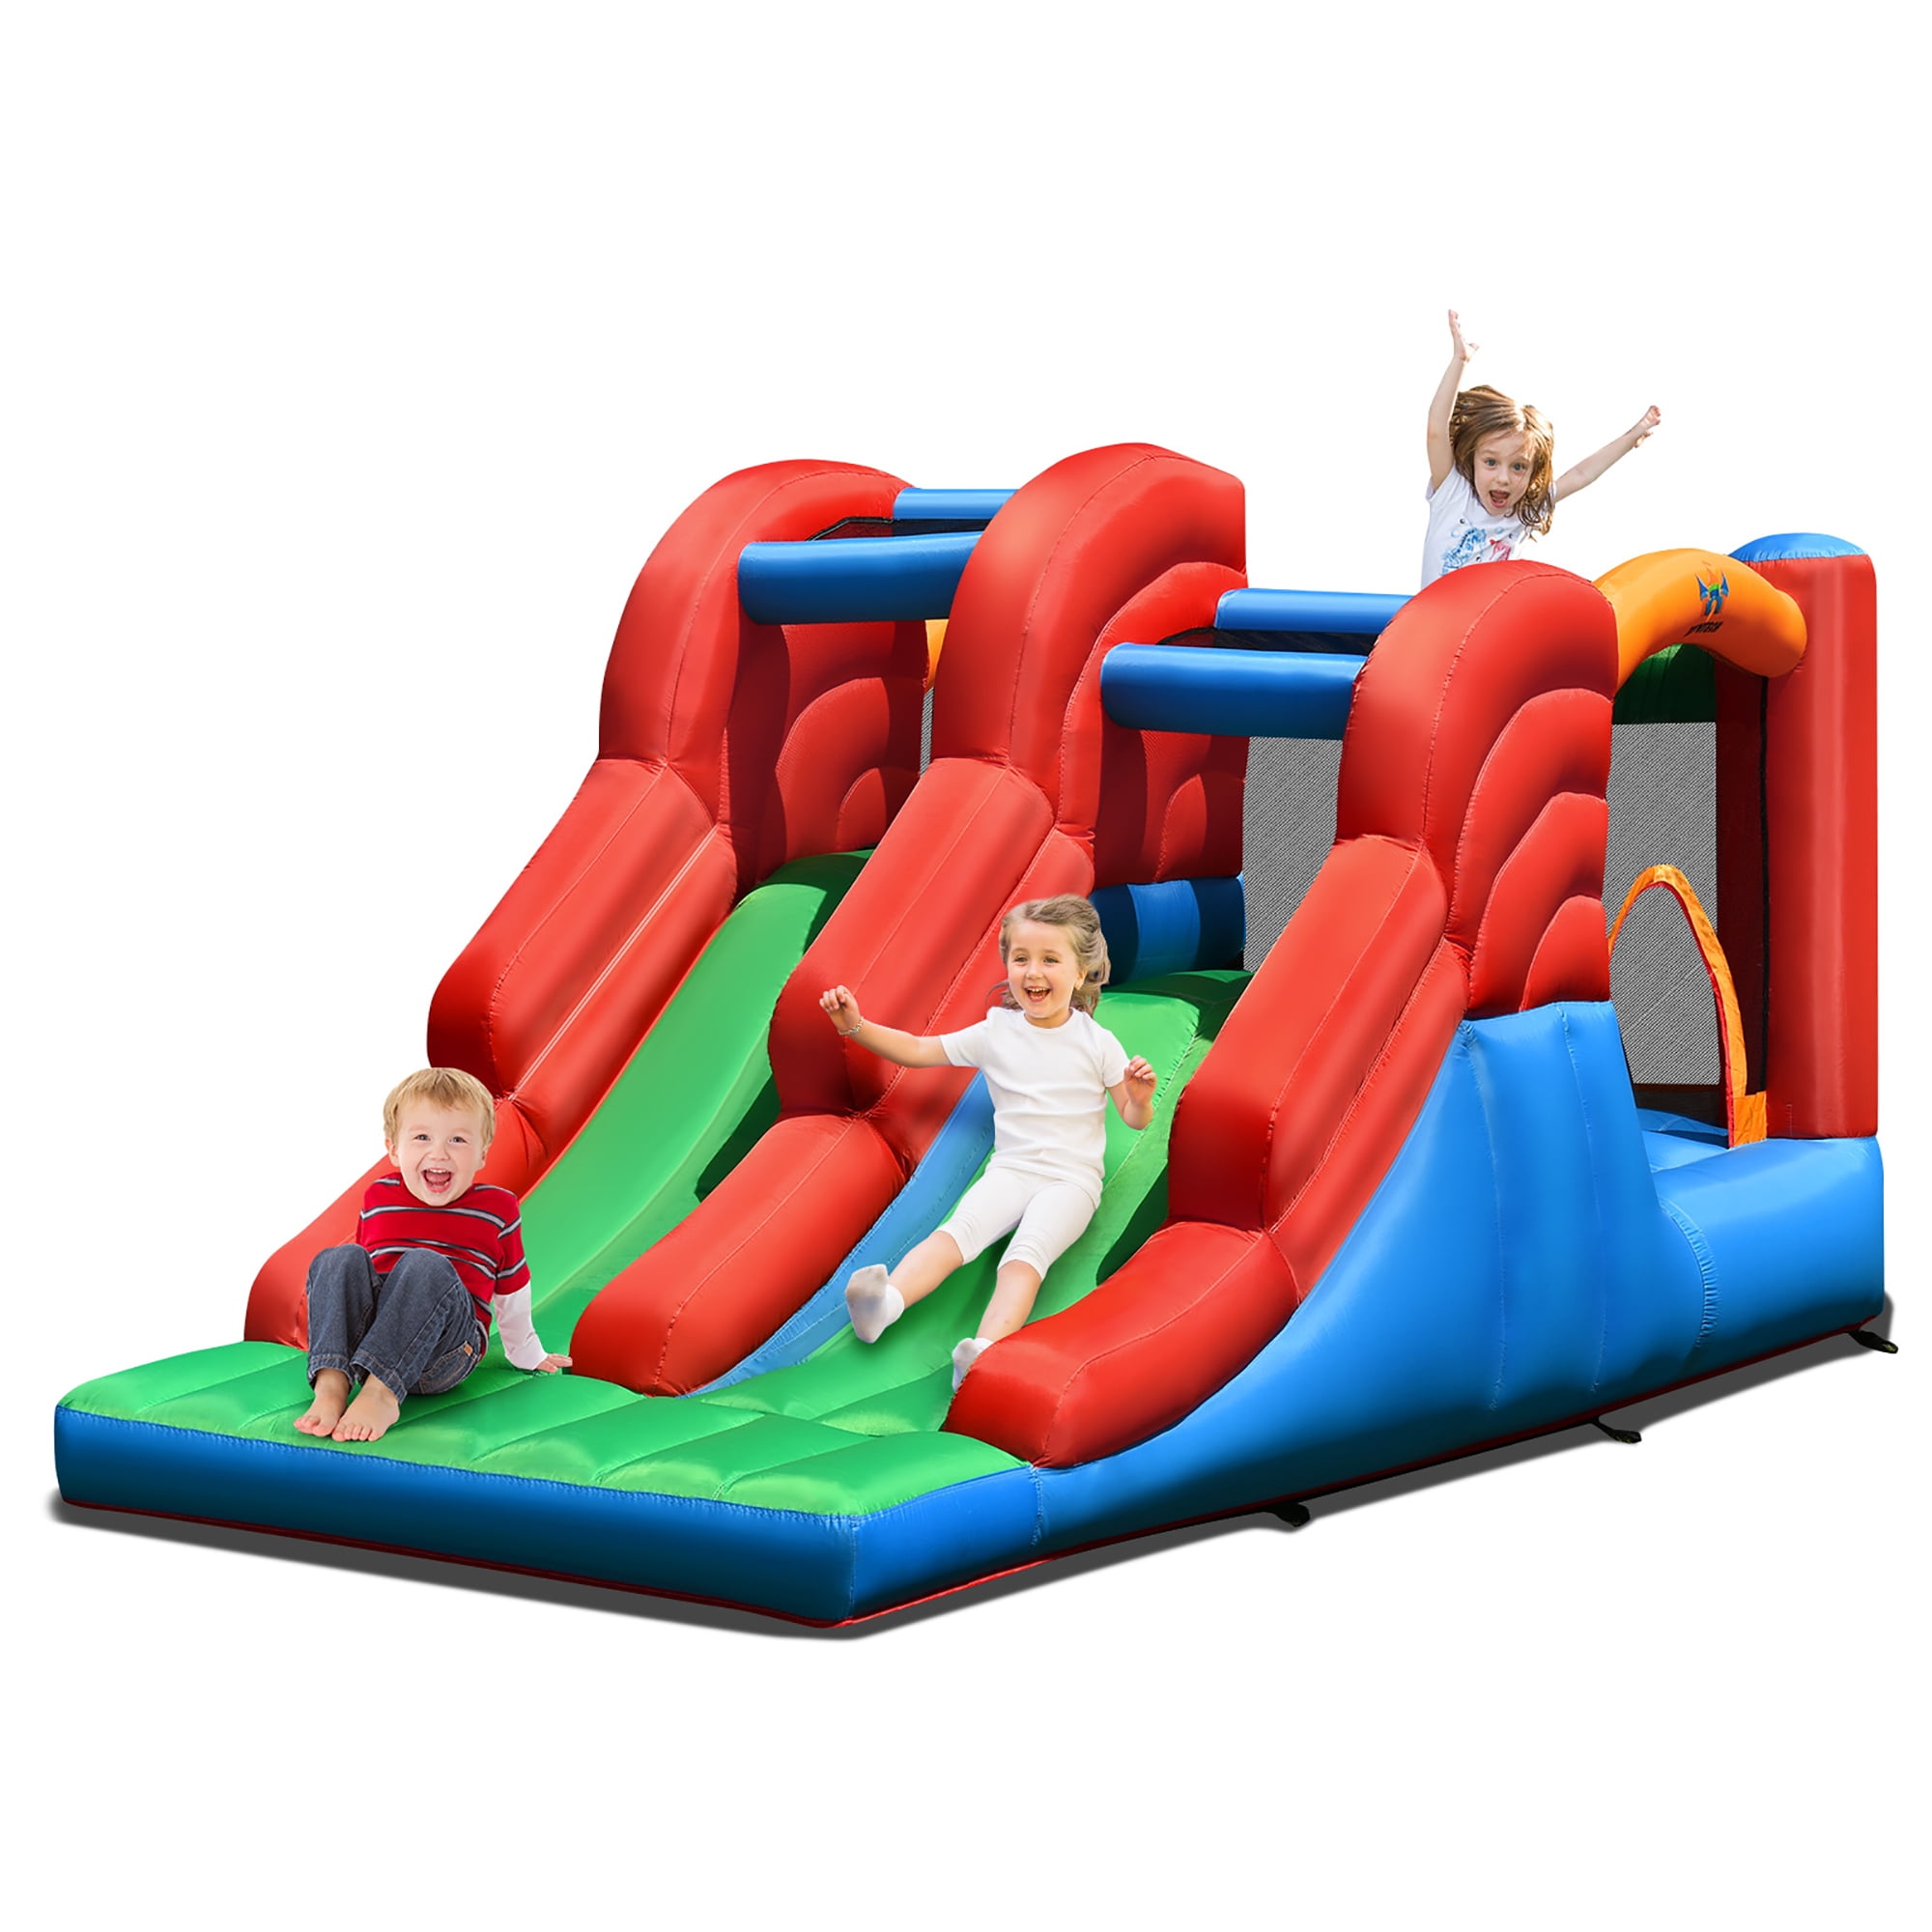 Costway Inflatable Bounce House 3-in-1 Dual Slides Jumping Castle ...